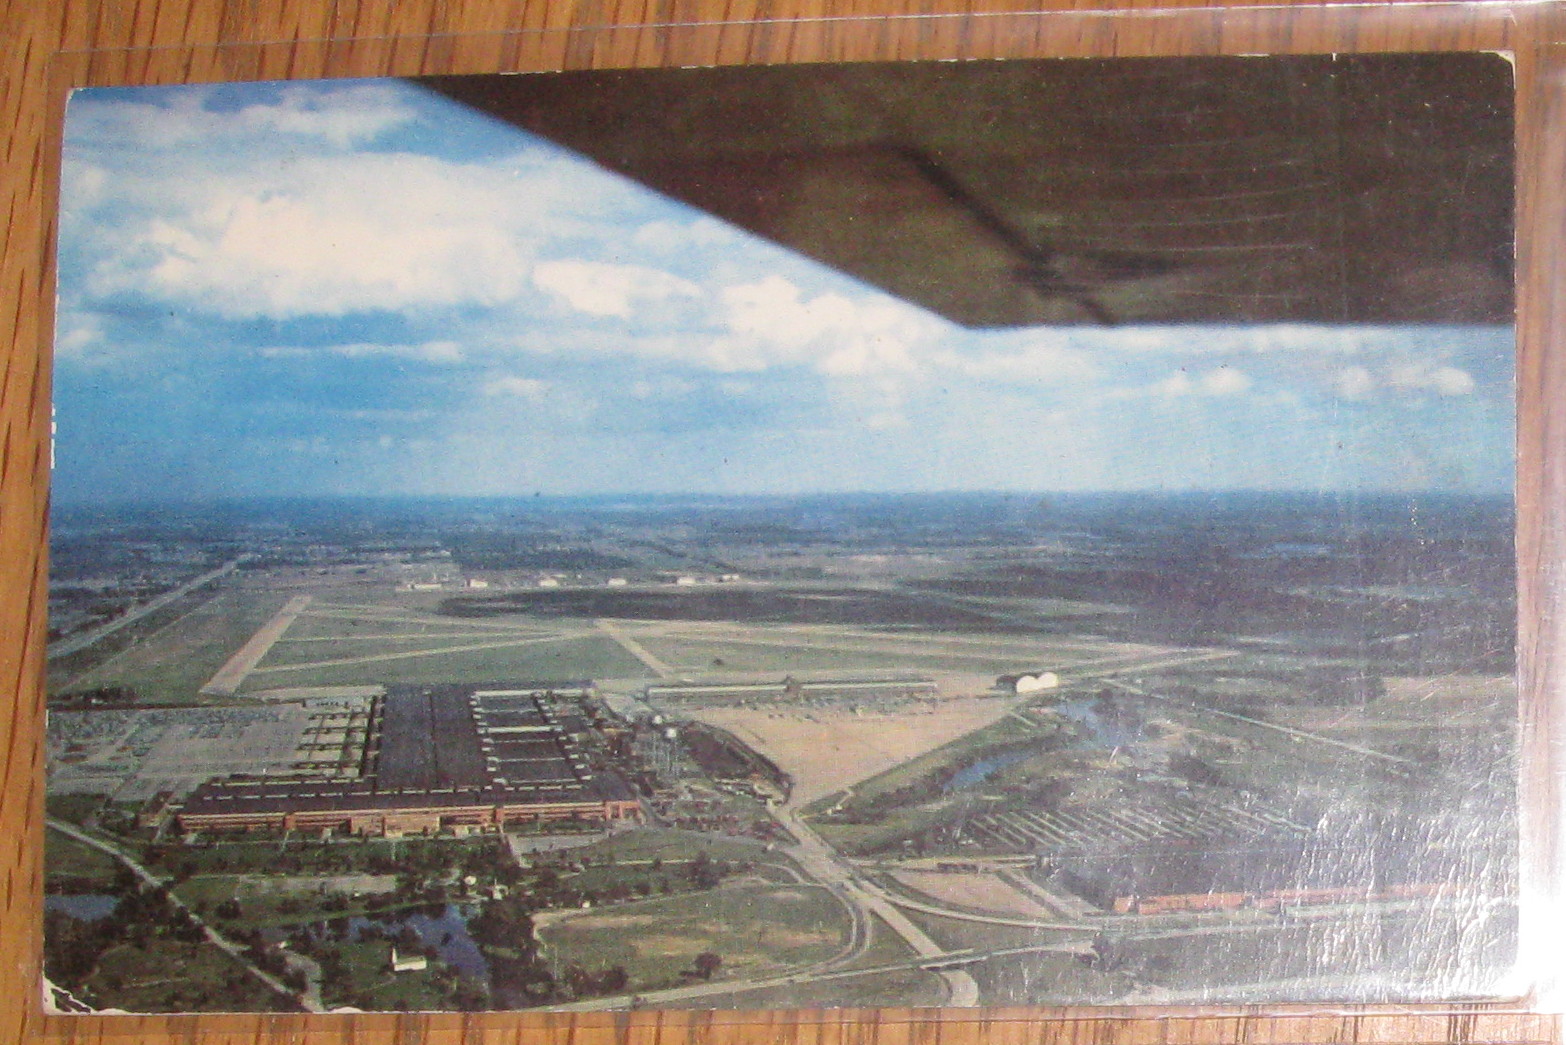 Willow Run airport and the General Motors plant